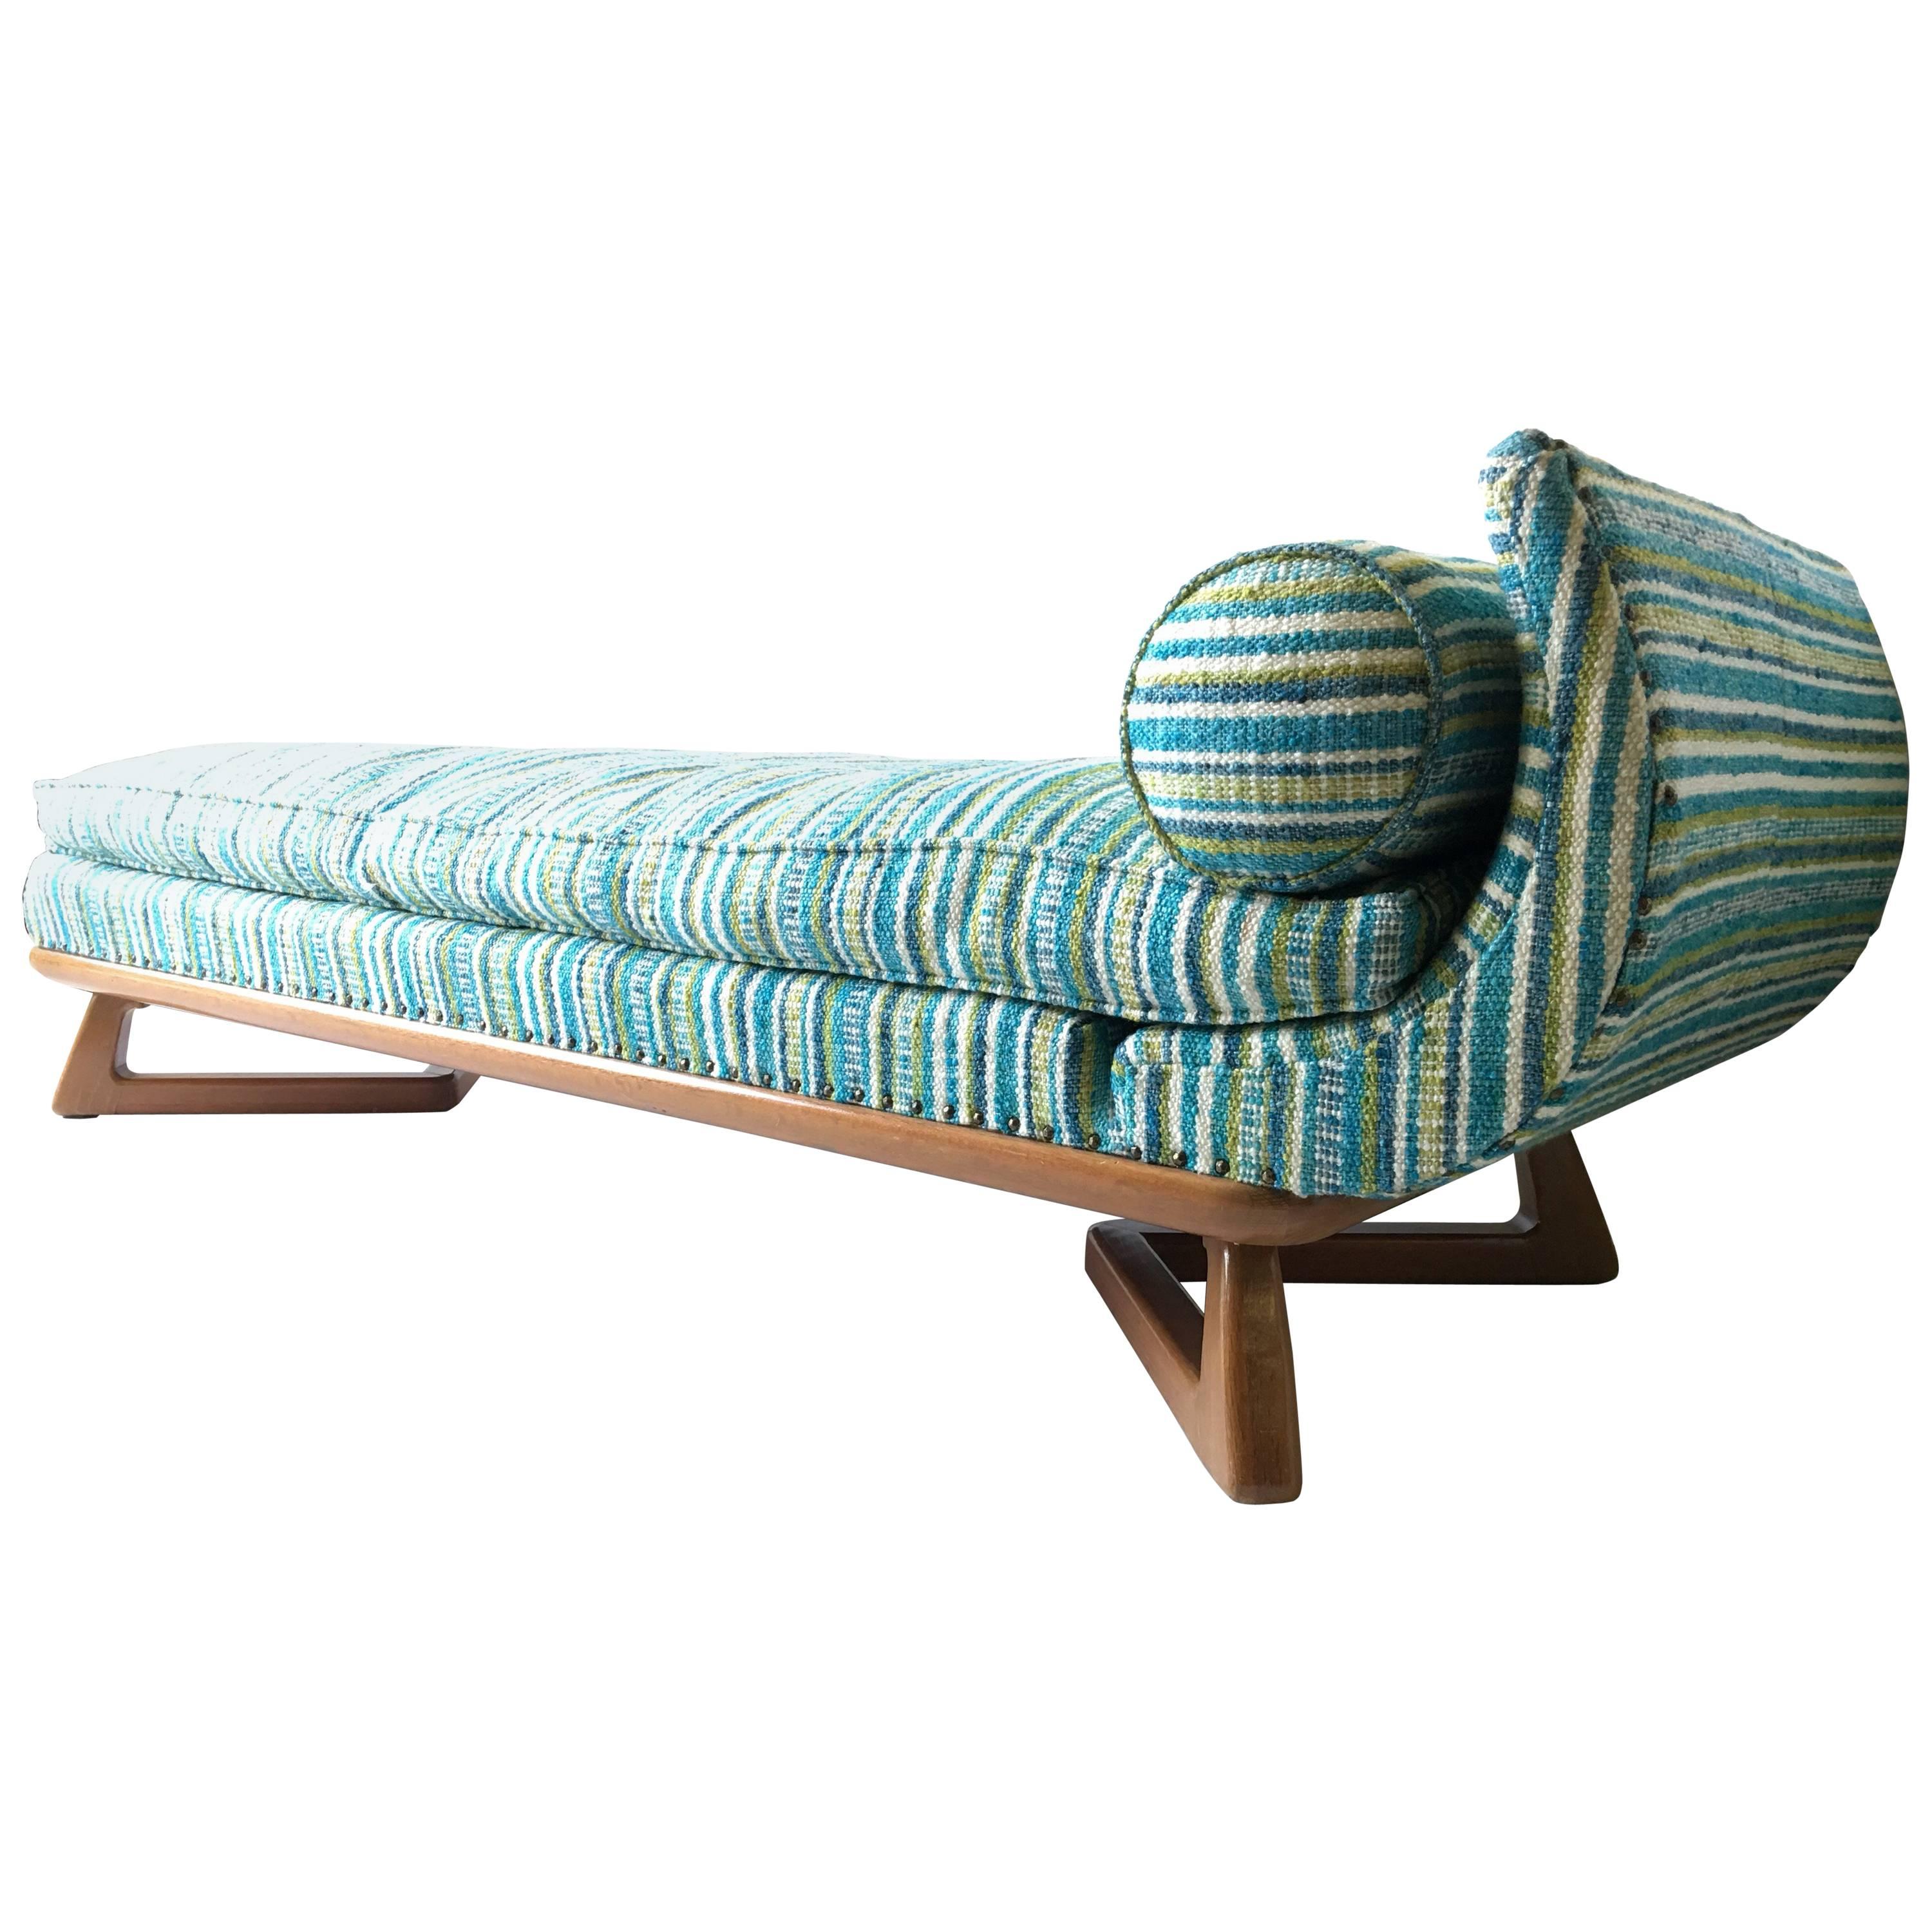 Paul Laszlo Interior Chaise Longue Daybed